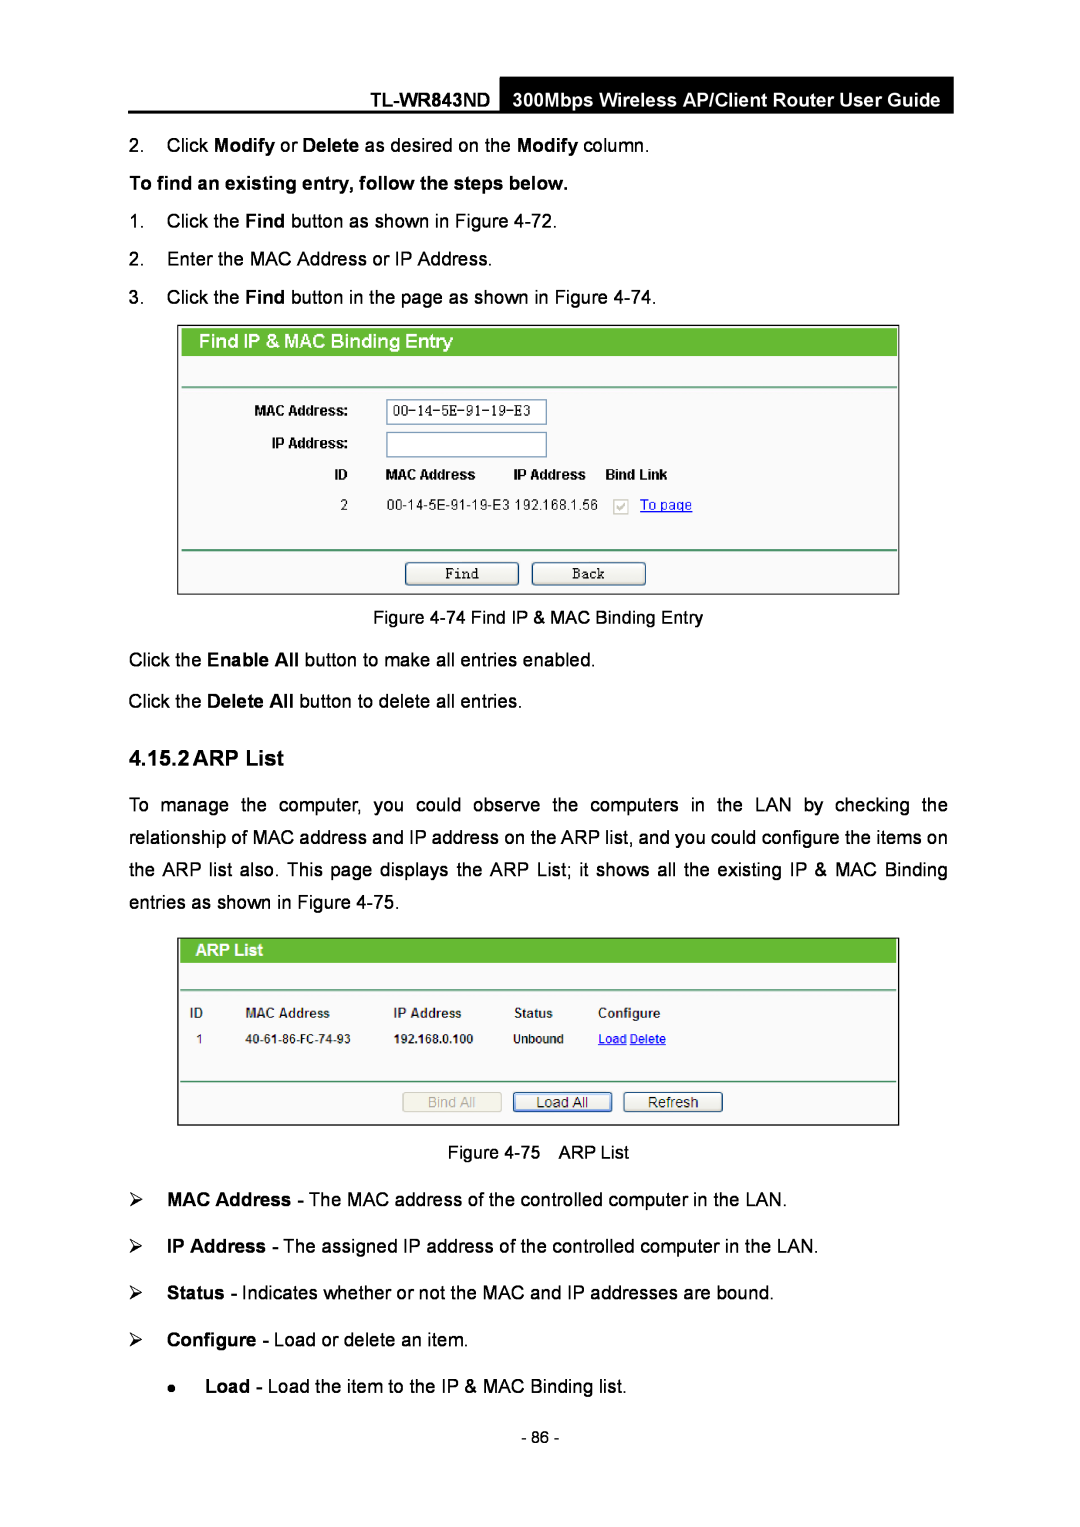 TP-Link TL-WR843ND manual ARP List, To find an existing entry, follow the steps below 